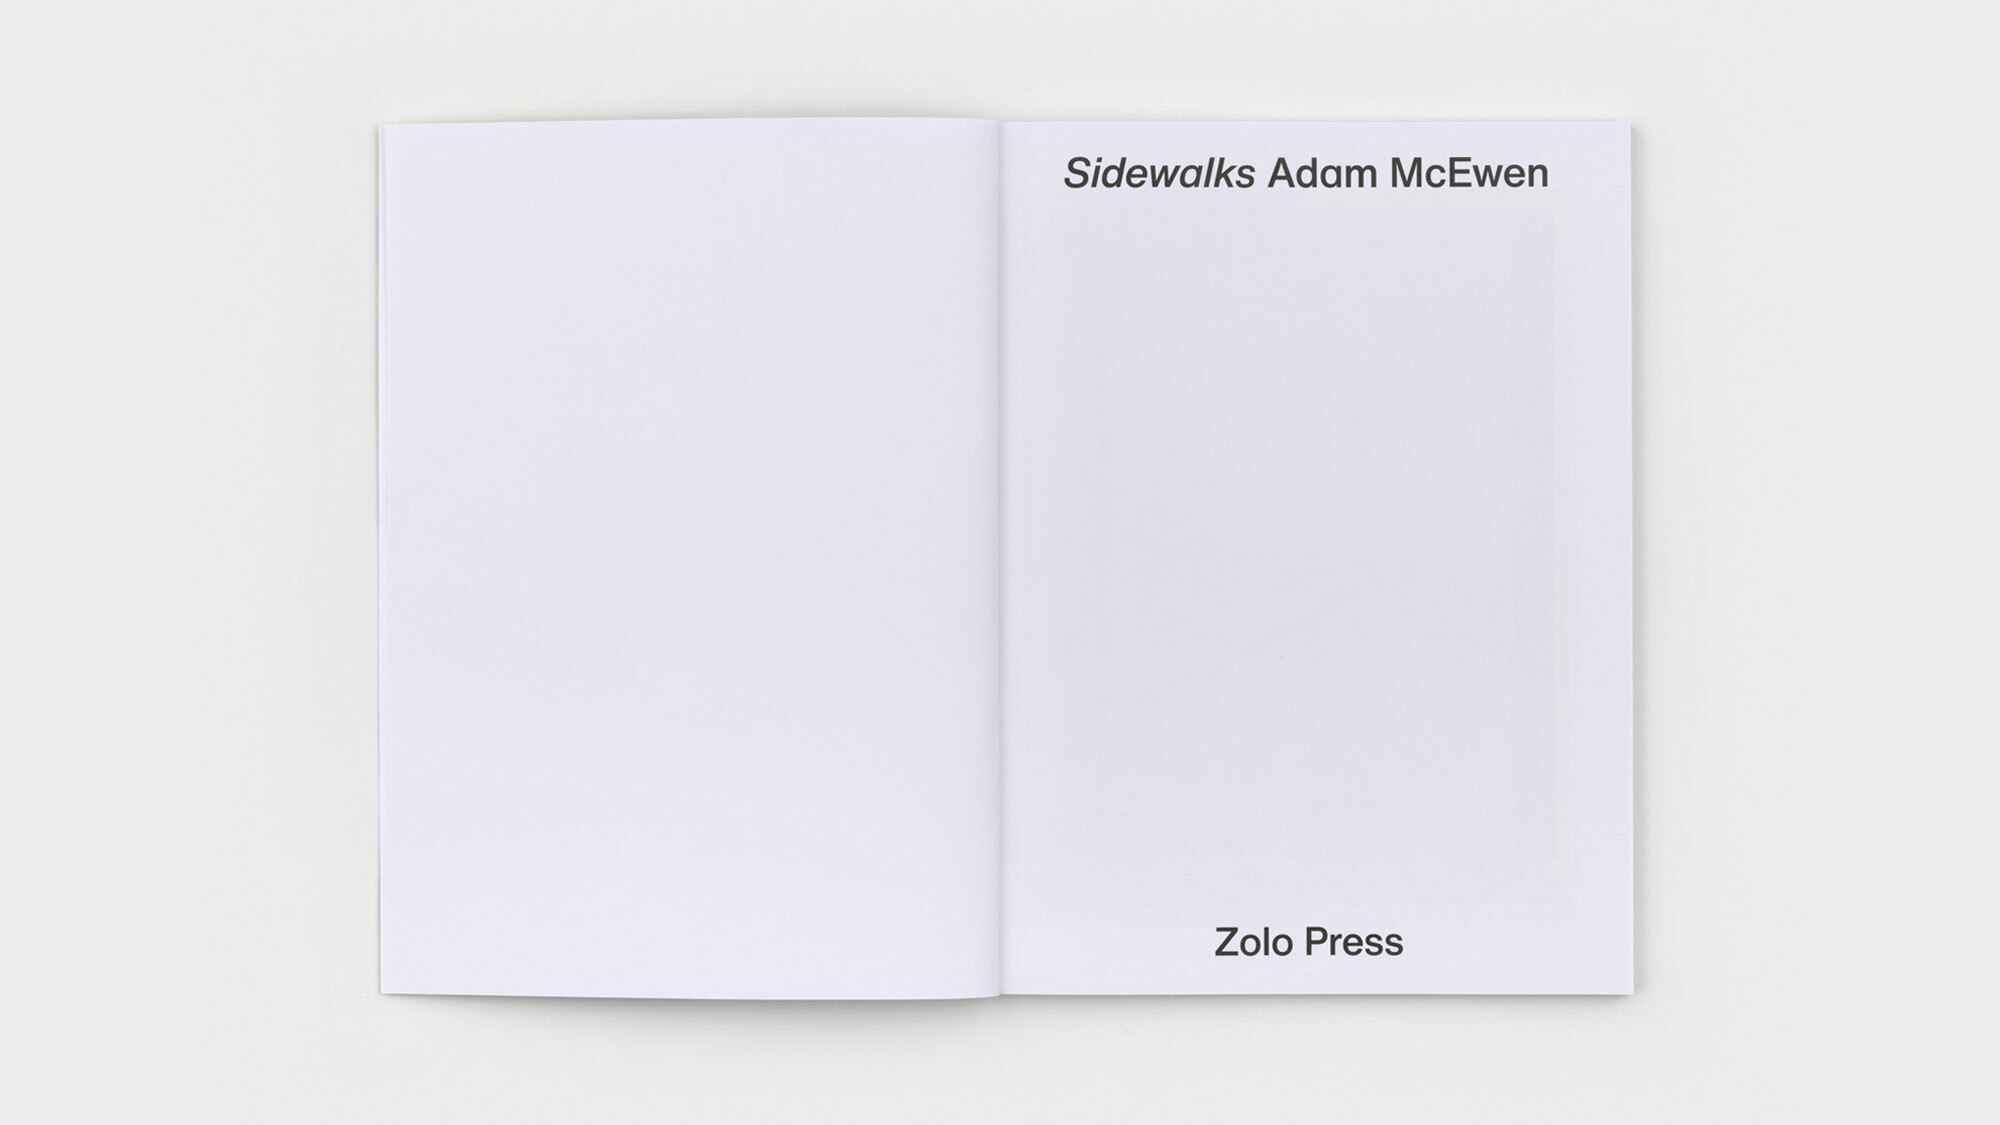 The book's inside cover. The left page is blank. The right lists, again, the title, author, and publisher—this time in larger black type.